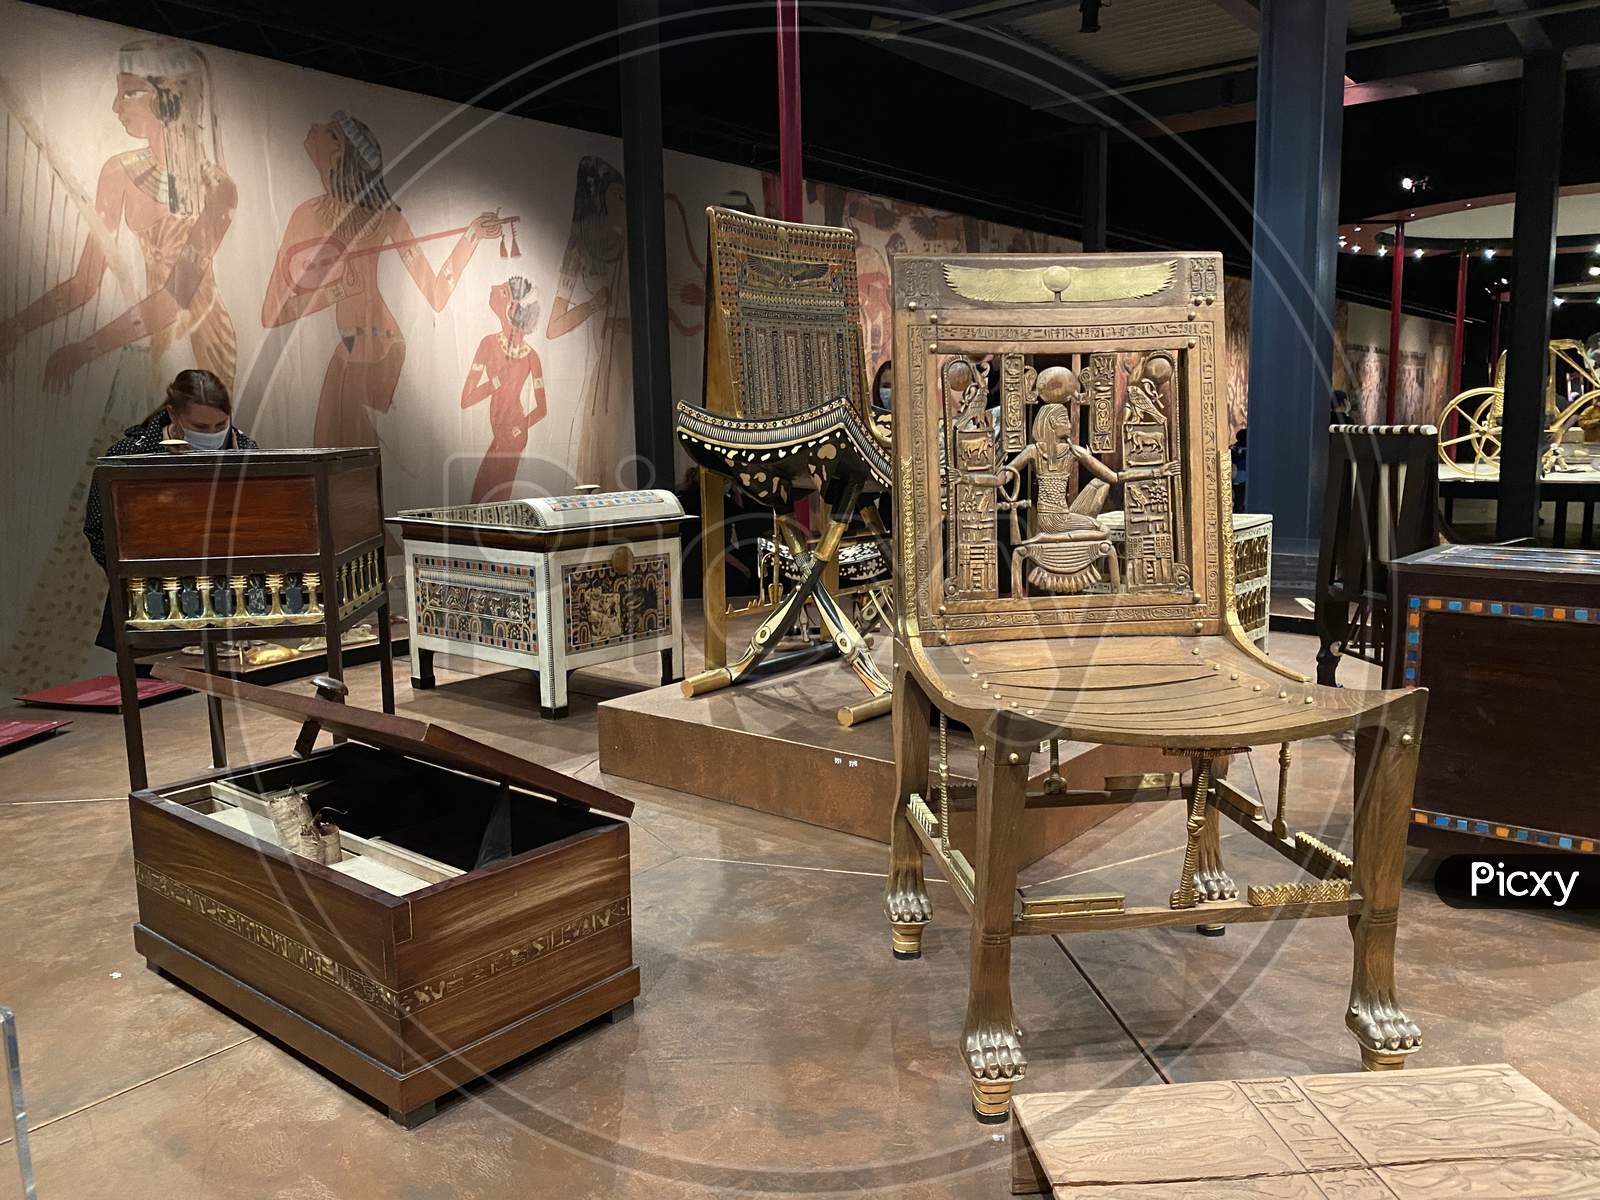 Replicas Of Golden Chair And Furniture From The Tomb Of Tutanchamun. 14.03.2021 - Oerlikon, Switzerland.